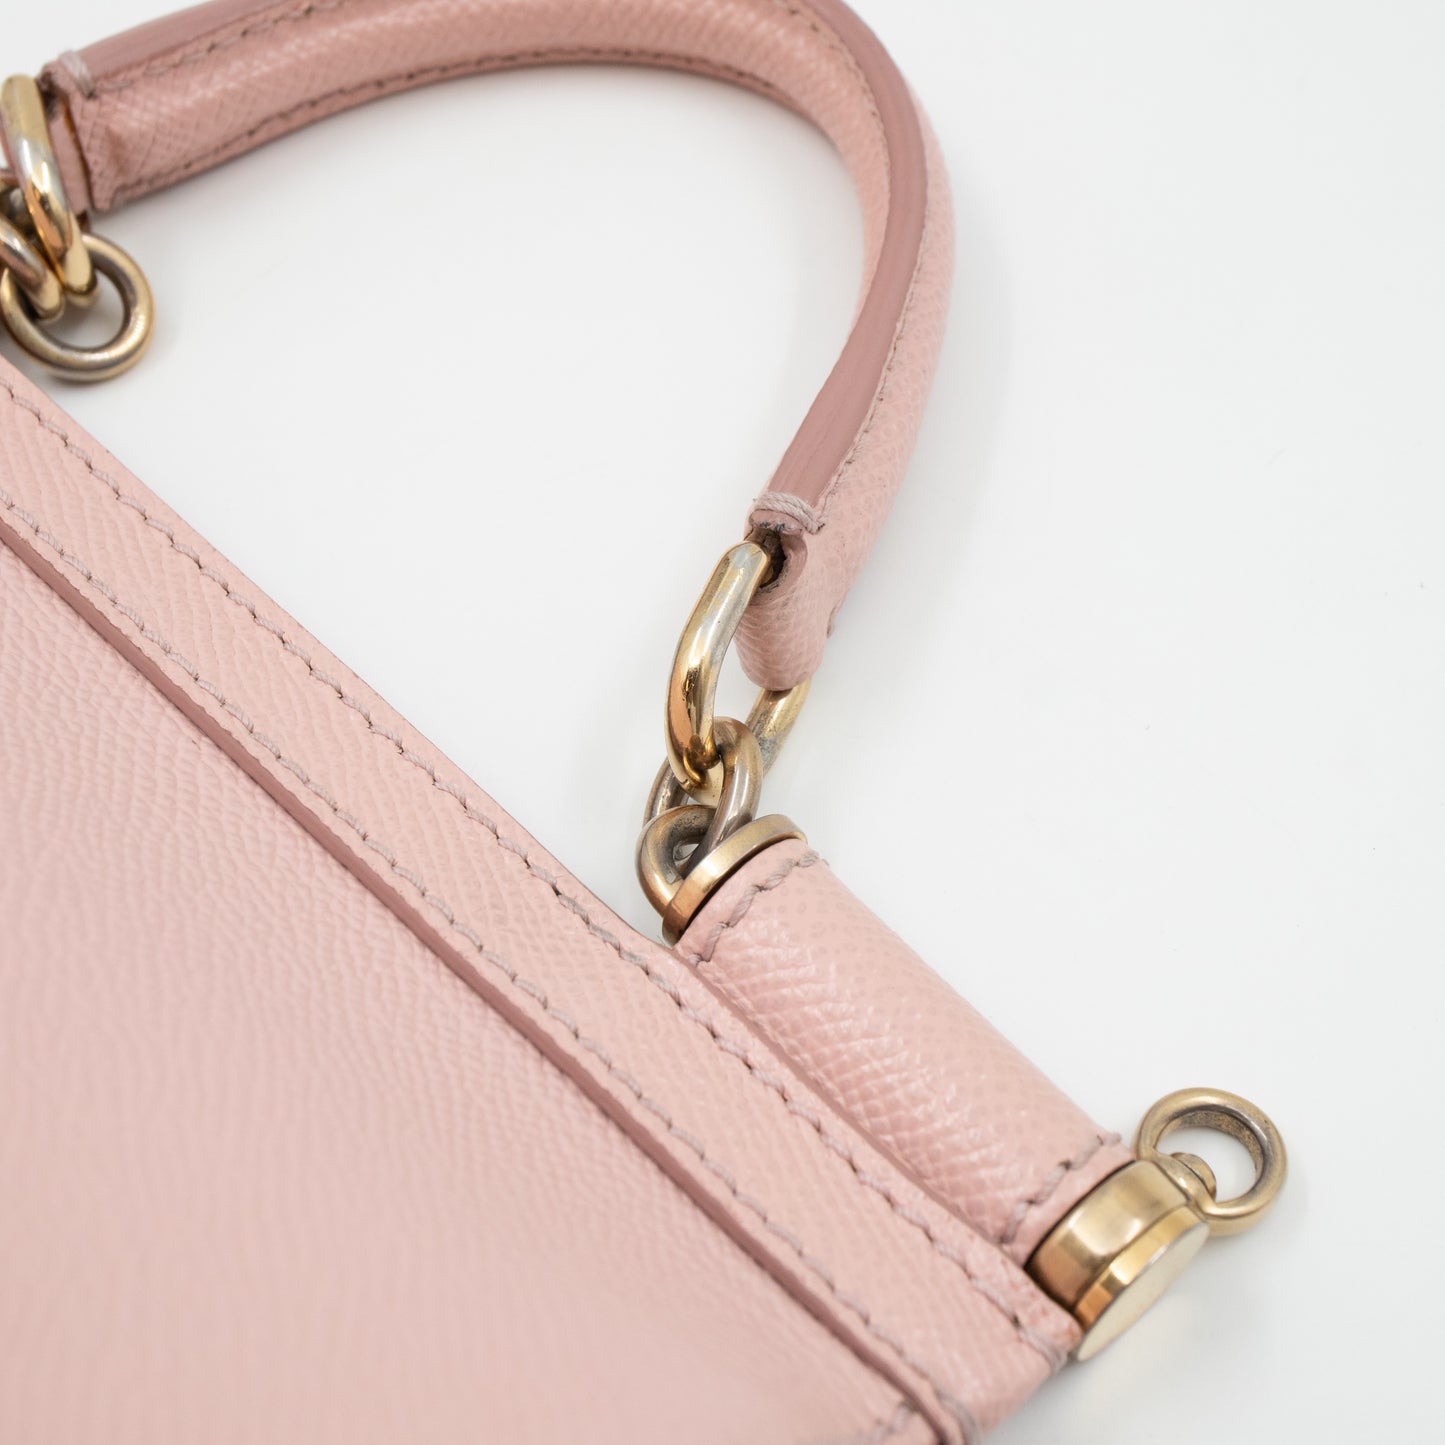 Sicily Small Dauphine Leather Light Pink